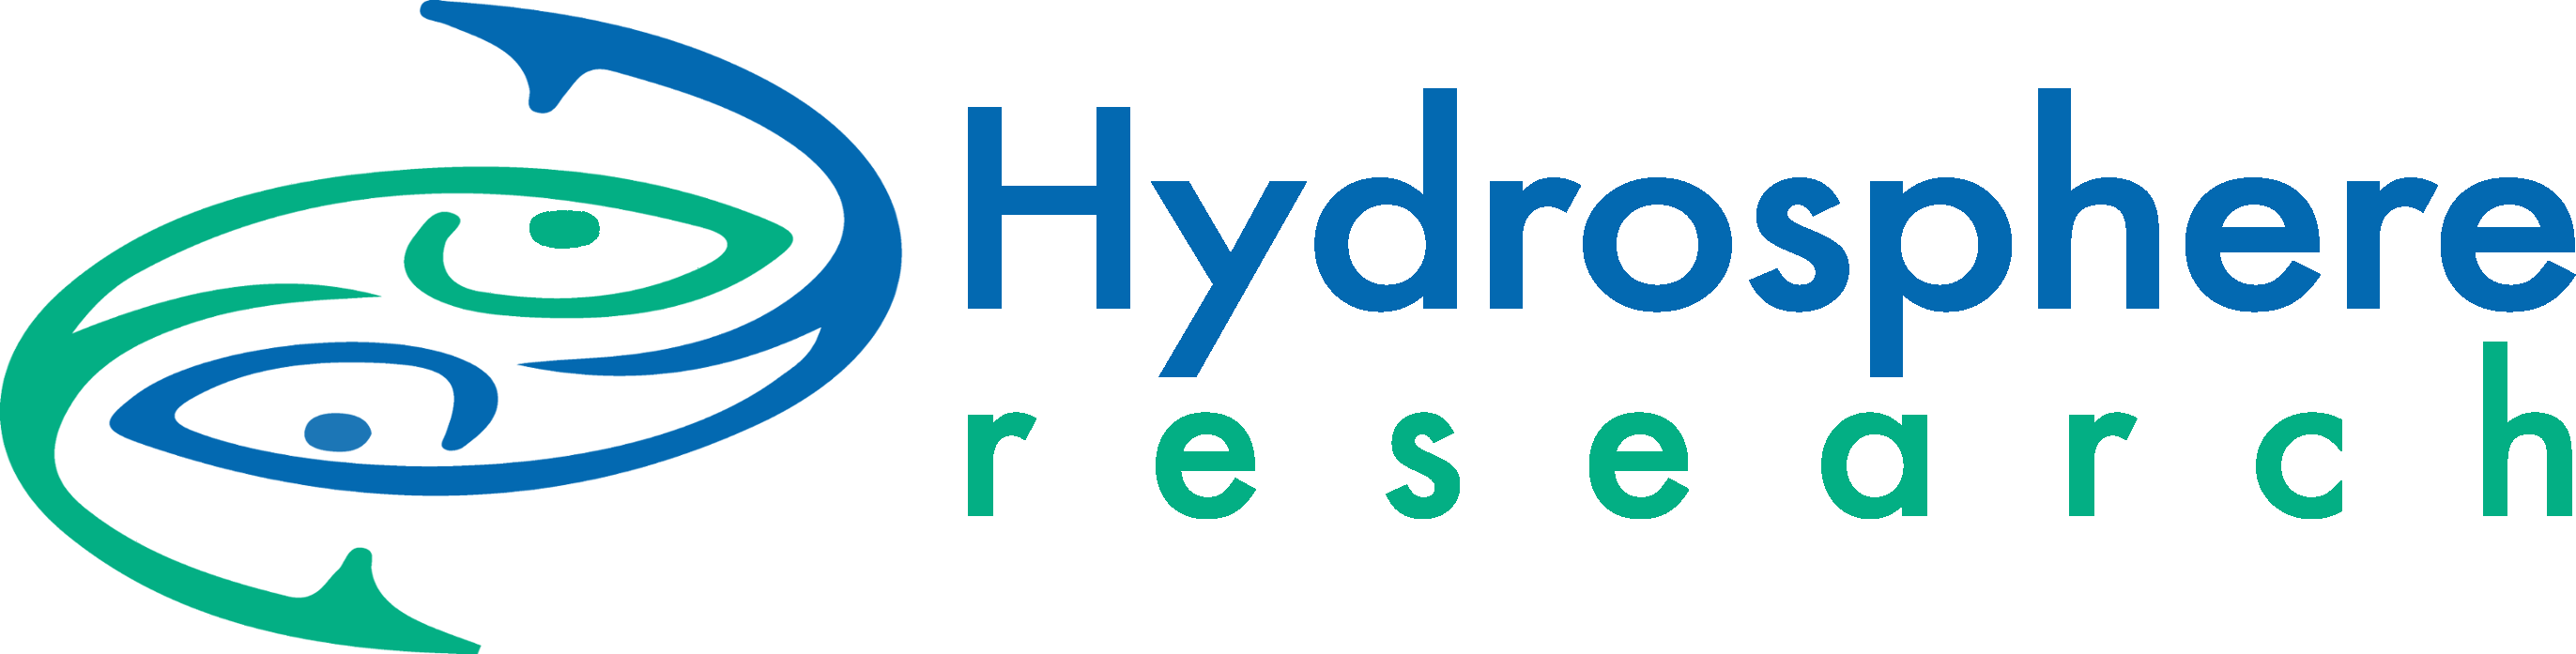 Hydrosphere Research Registers with Contract Laboratory - The Laboratory Outsourcing Network!